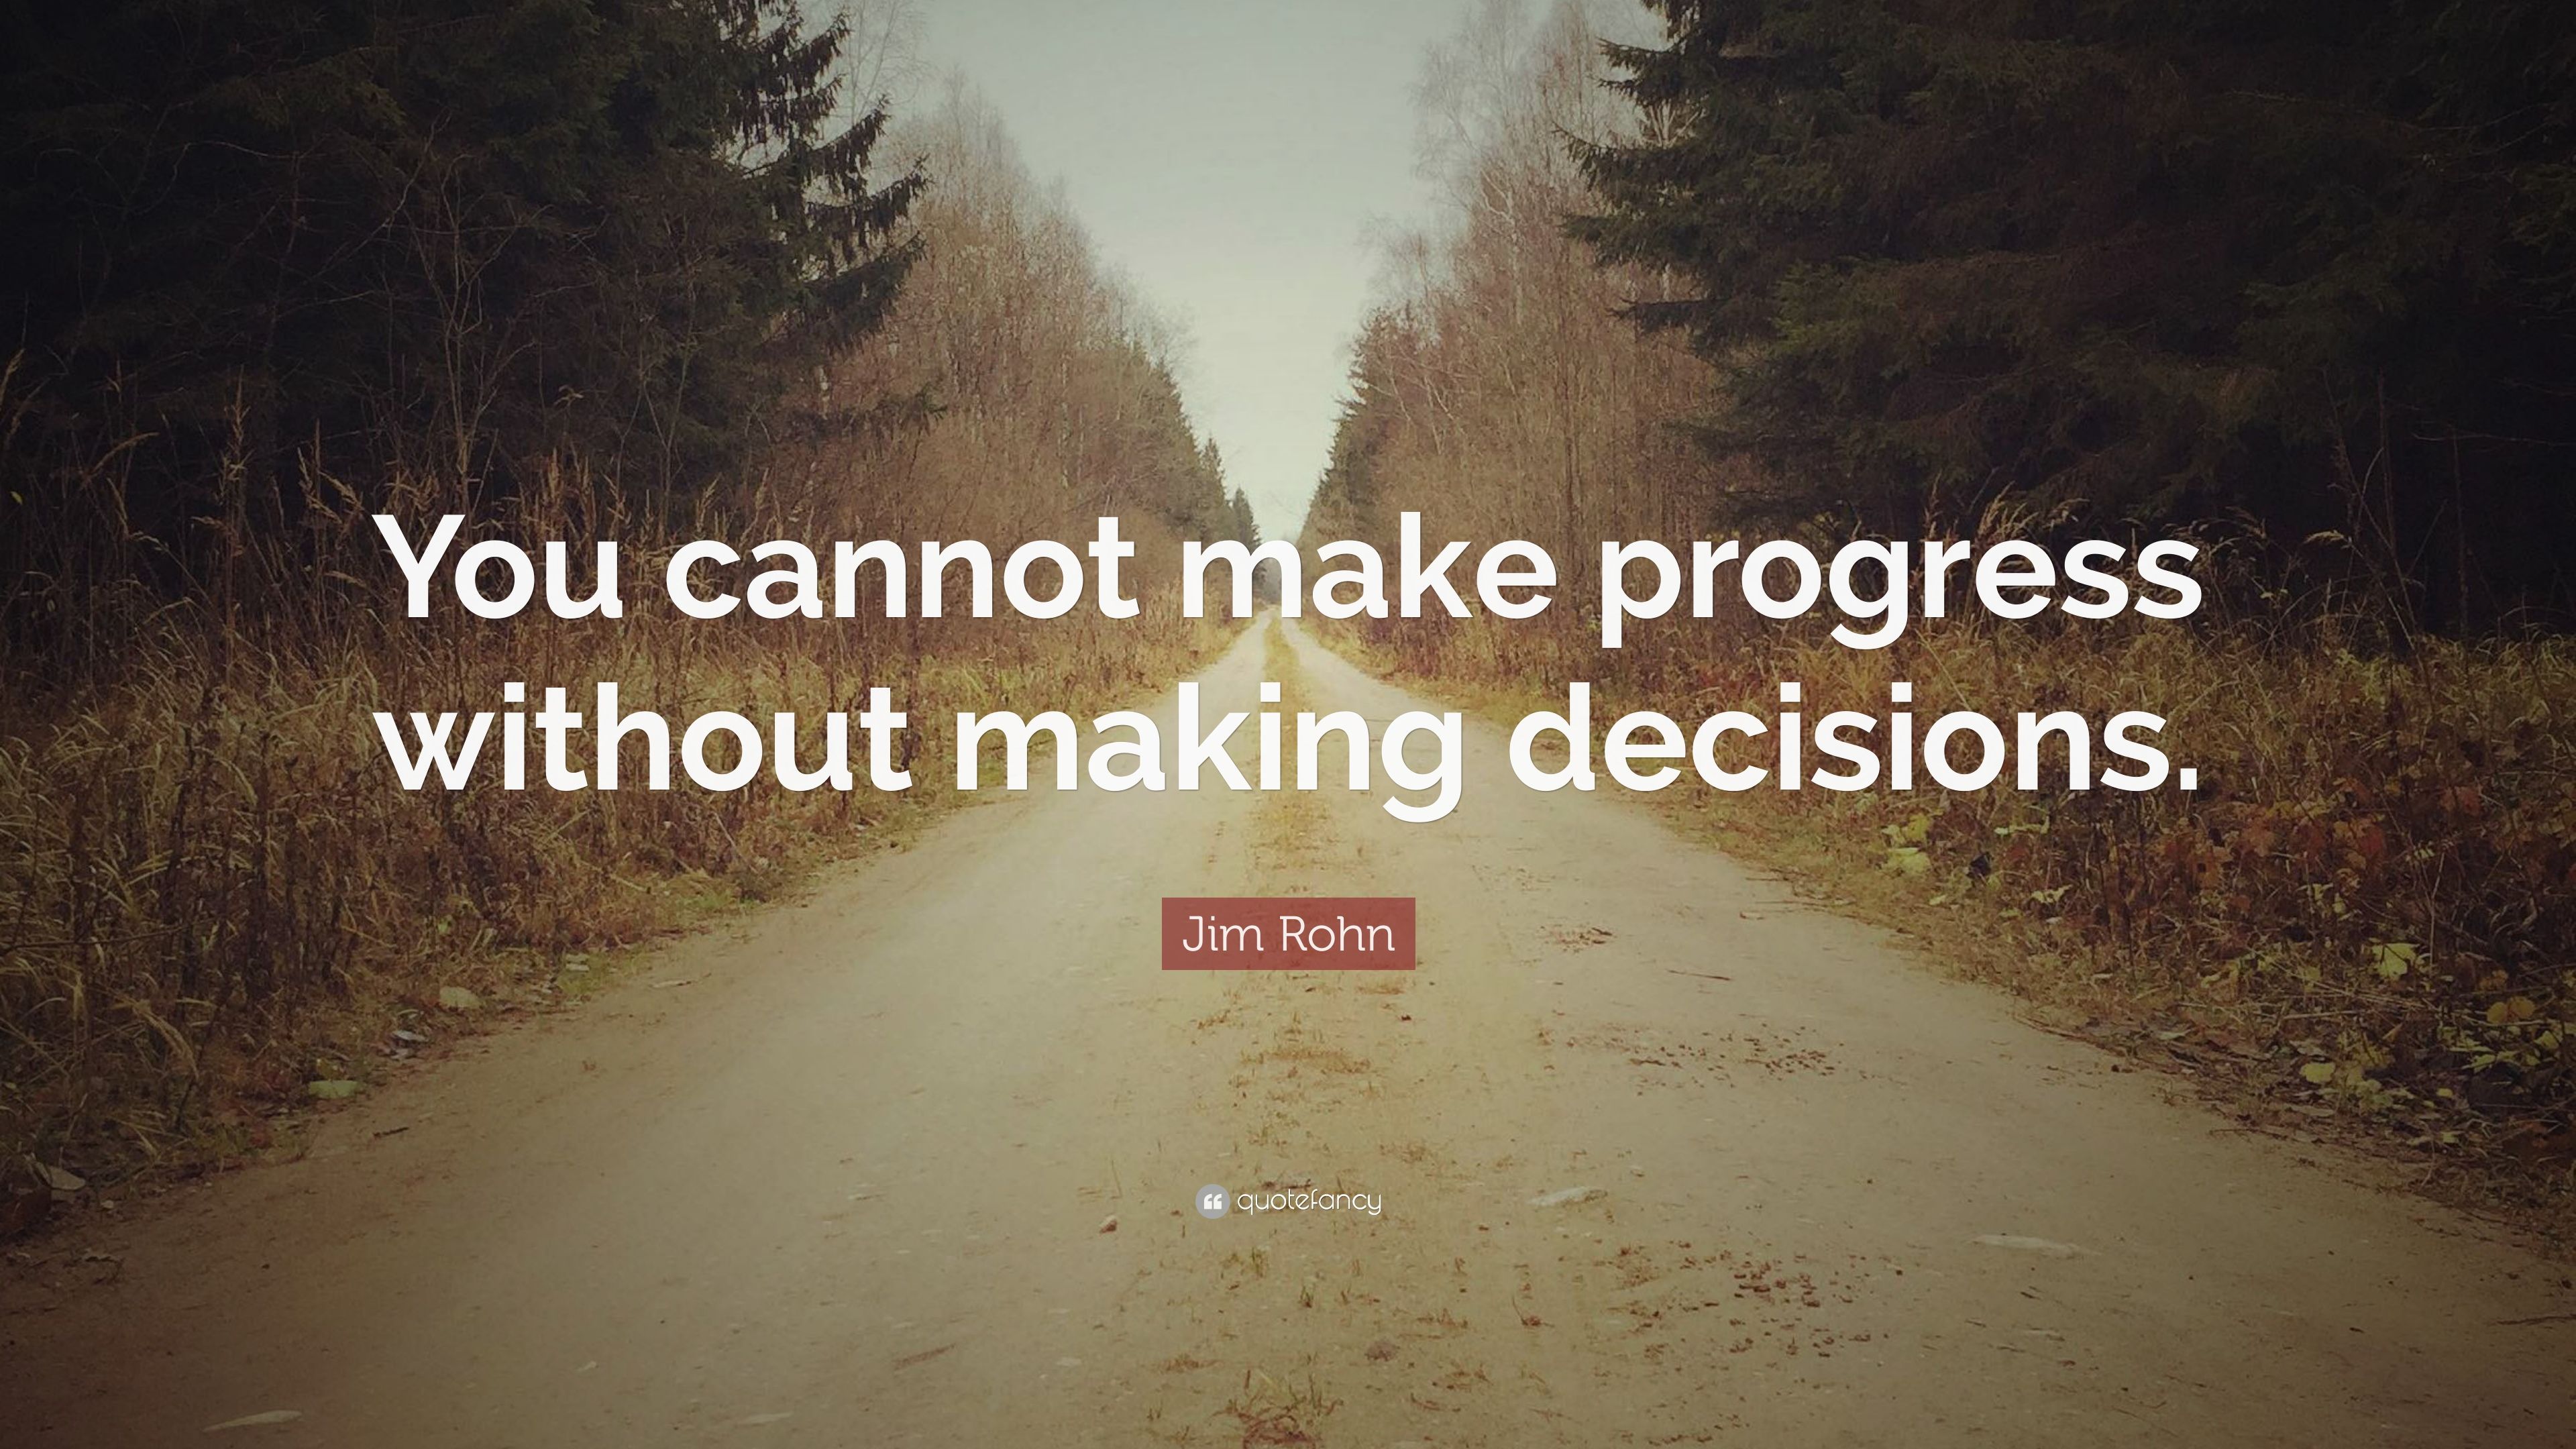 Jim Rohn Quote: “You cannot make progress without making decisions